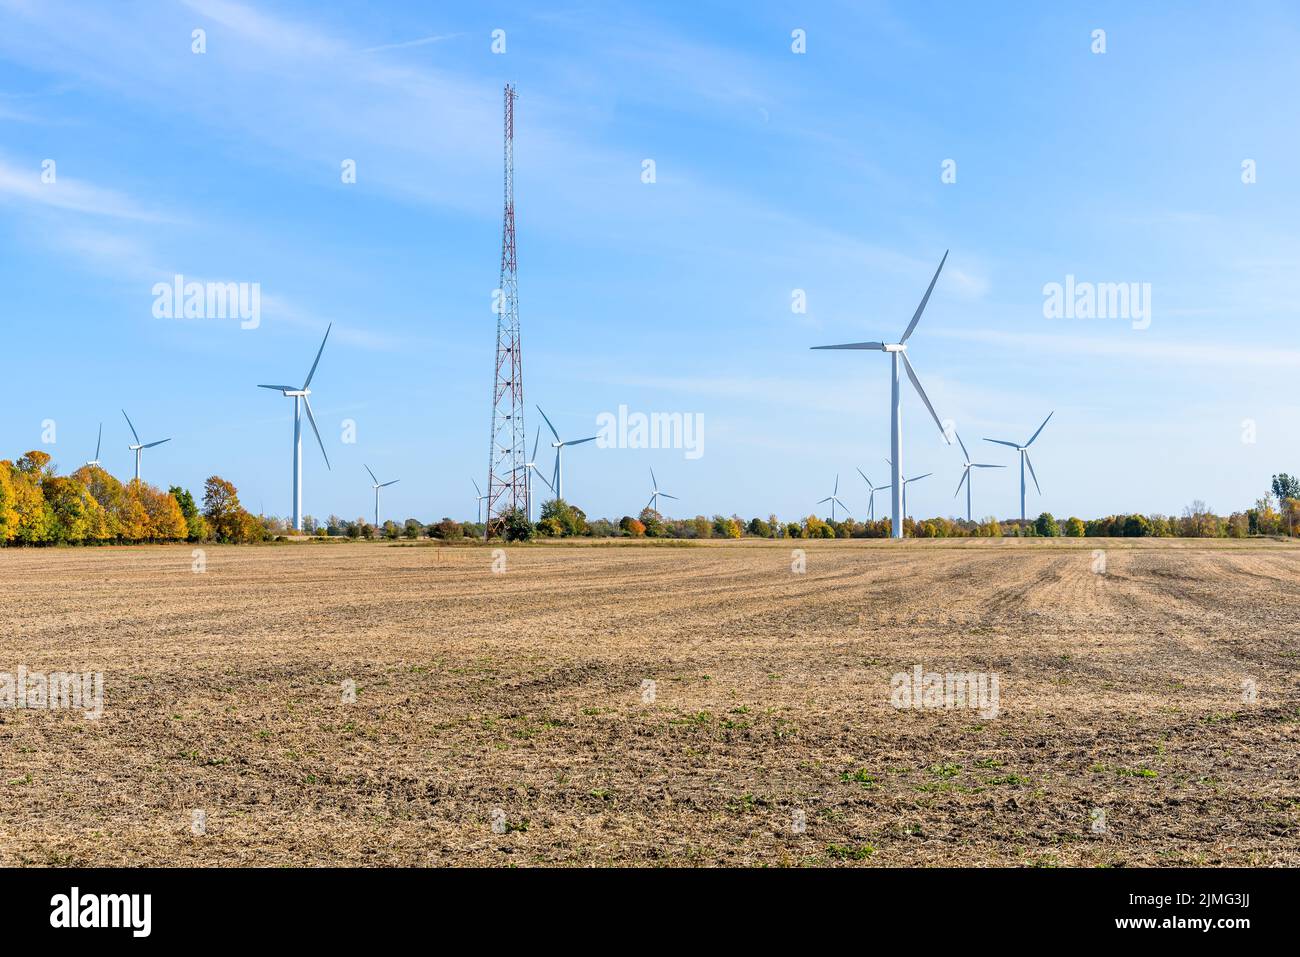 Wind turbines and tall antenna in a harvested field under blue sky in autumn Stock Photo